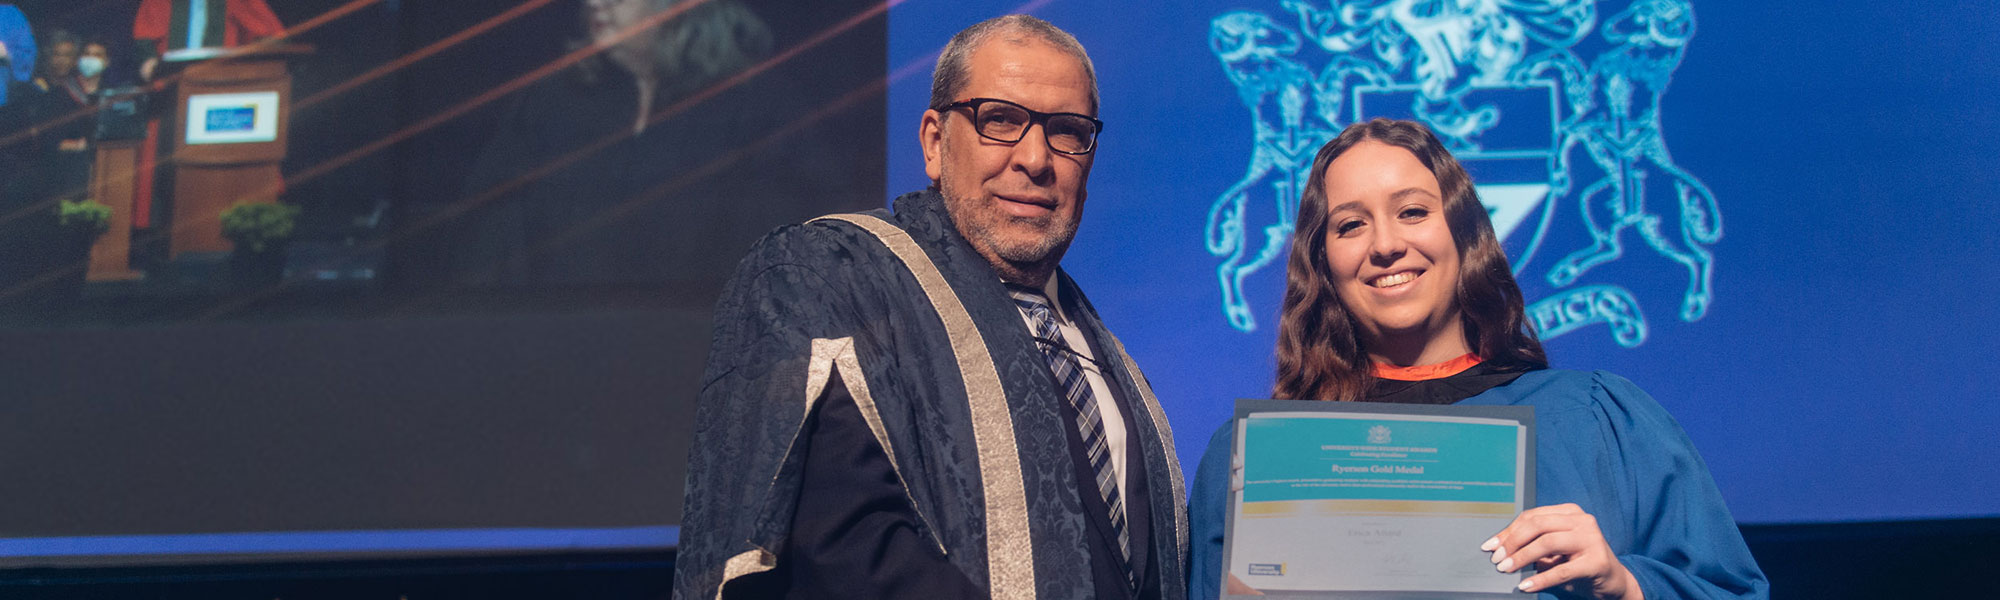 Erica Attard receives the university Gold medal for FEAS from President Lachemi during convocation